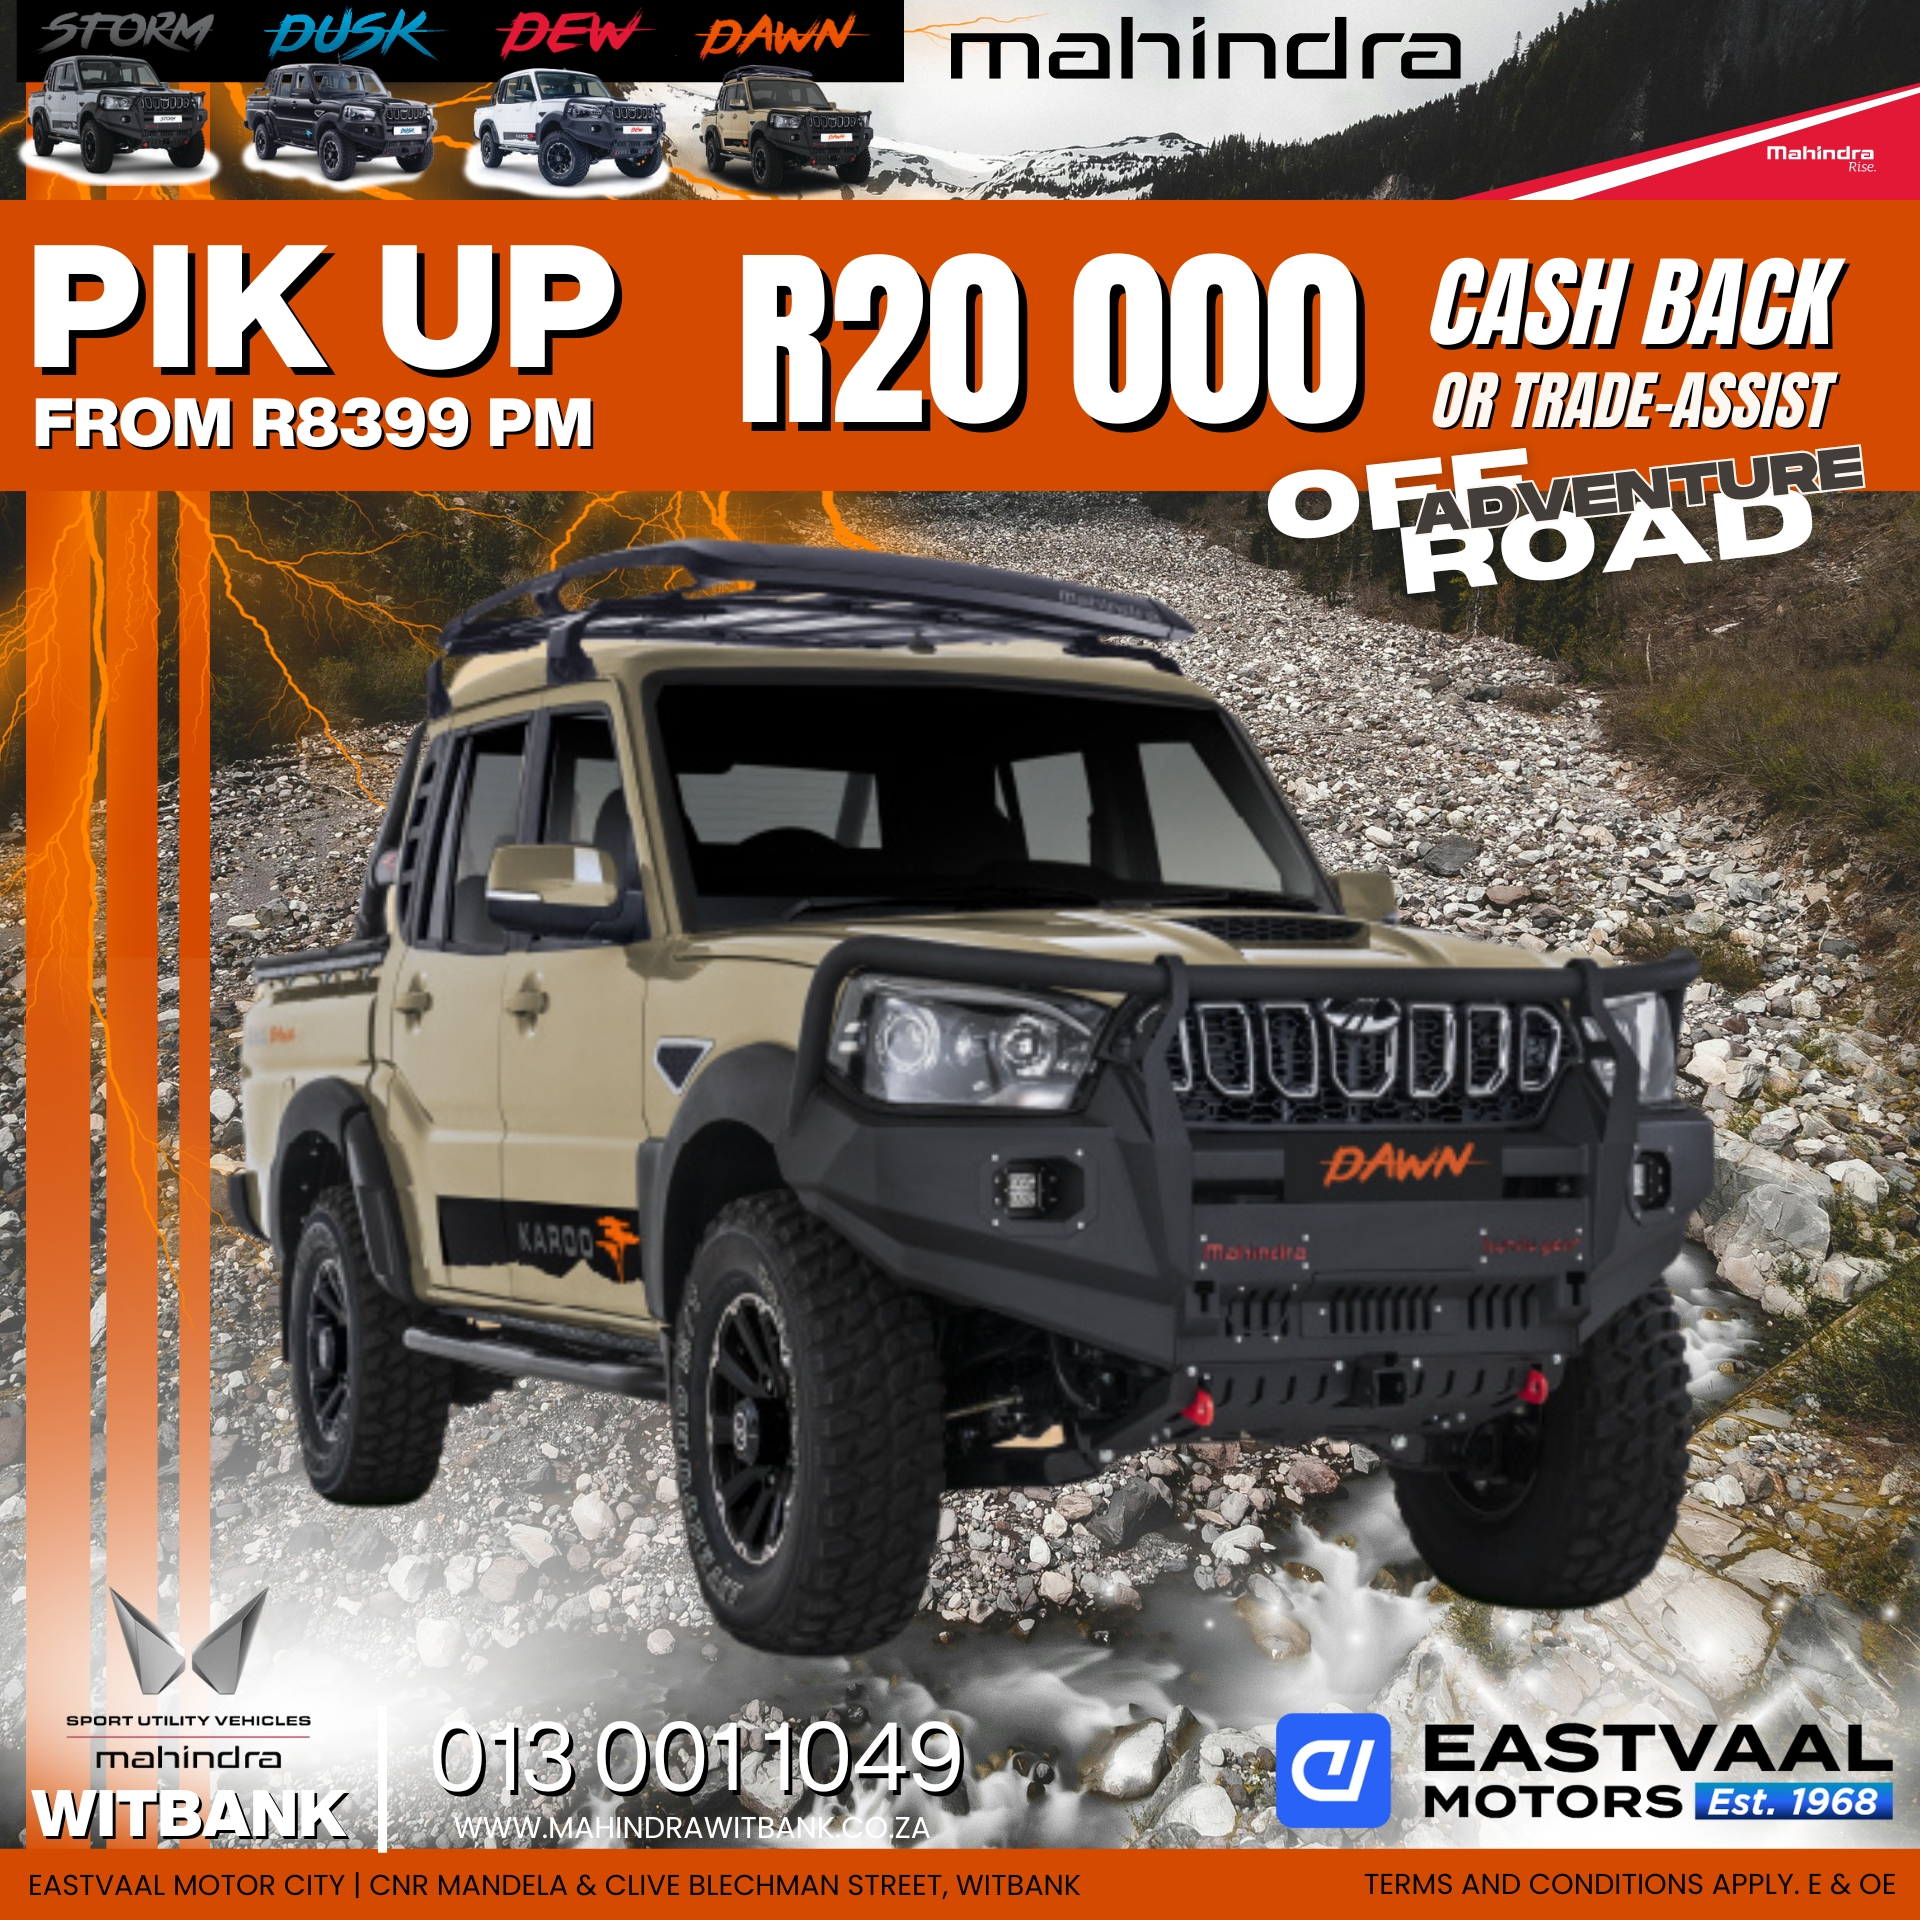 July just got hotter with our sizzling Mahindra deals at Eastvaal Motor City. Don’t miss out! image from 